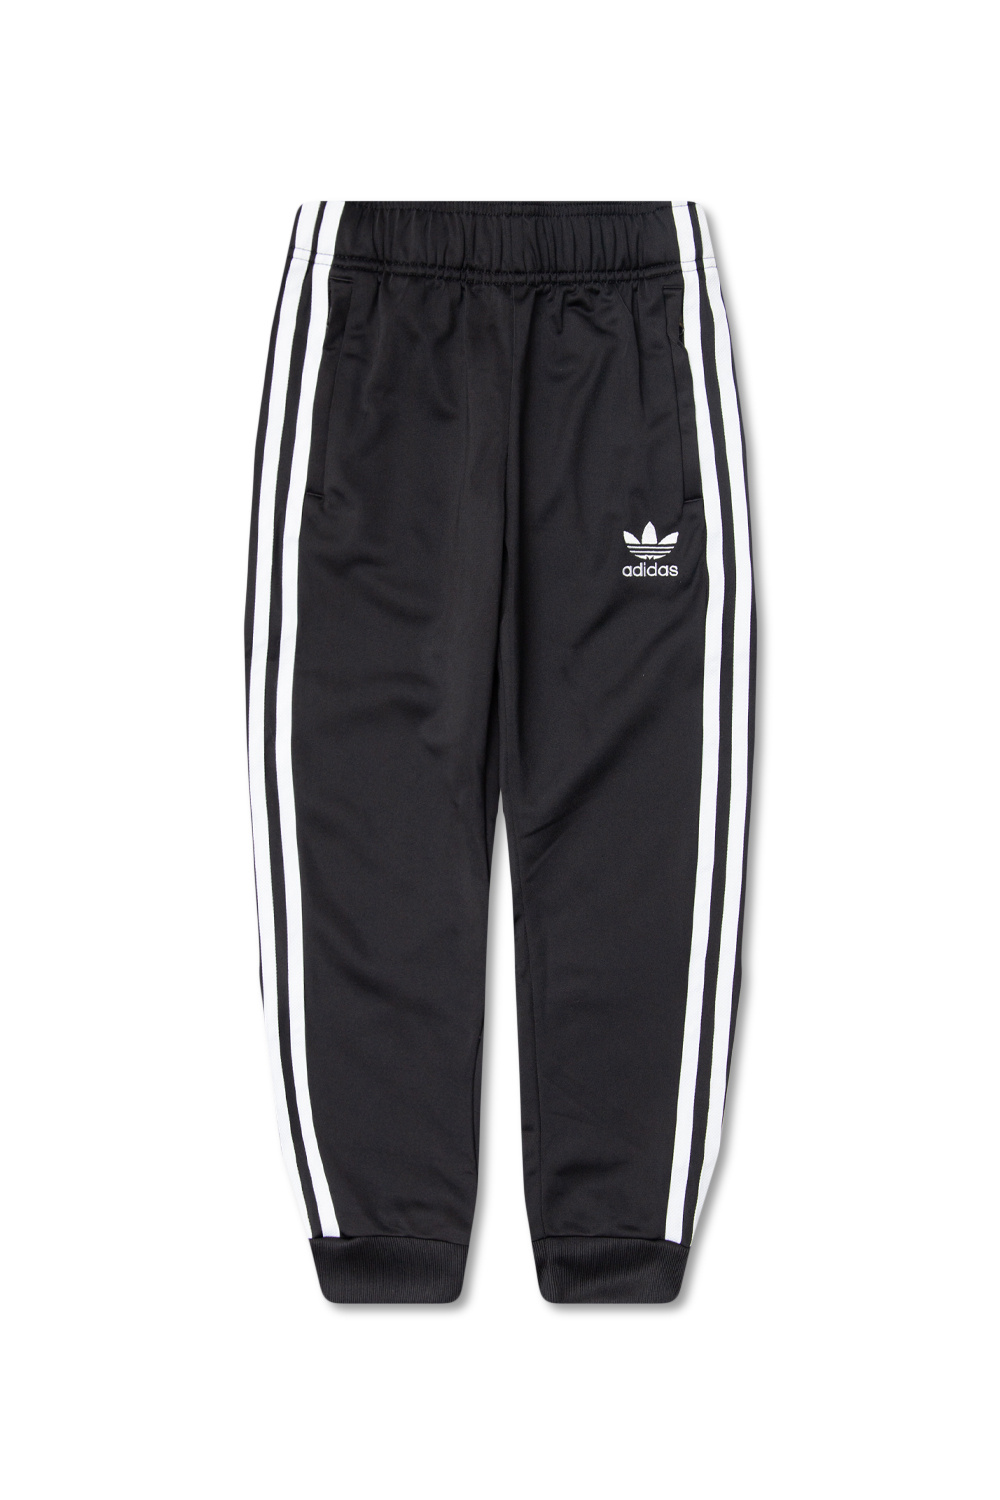 yellow adidas sweatpants  adidas Sportswear Shoes  Clothes in Unique  Offers  Arvind Sport